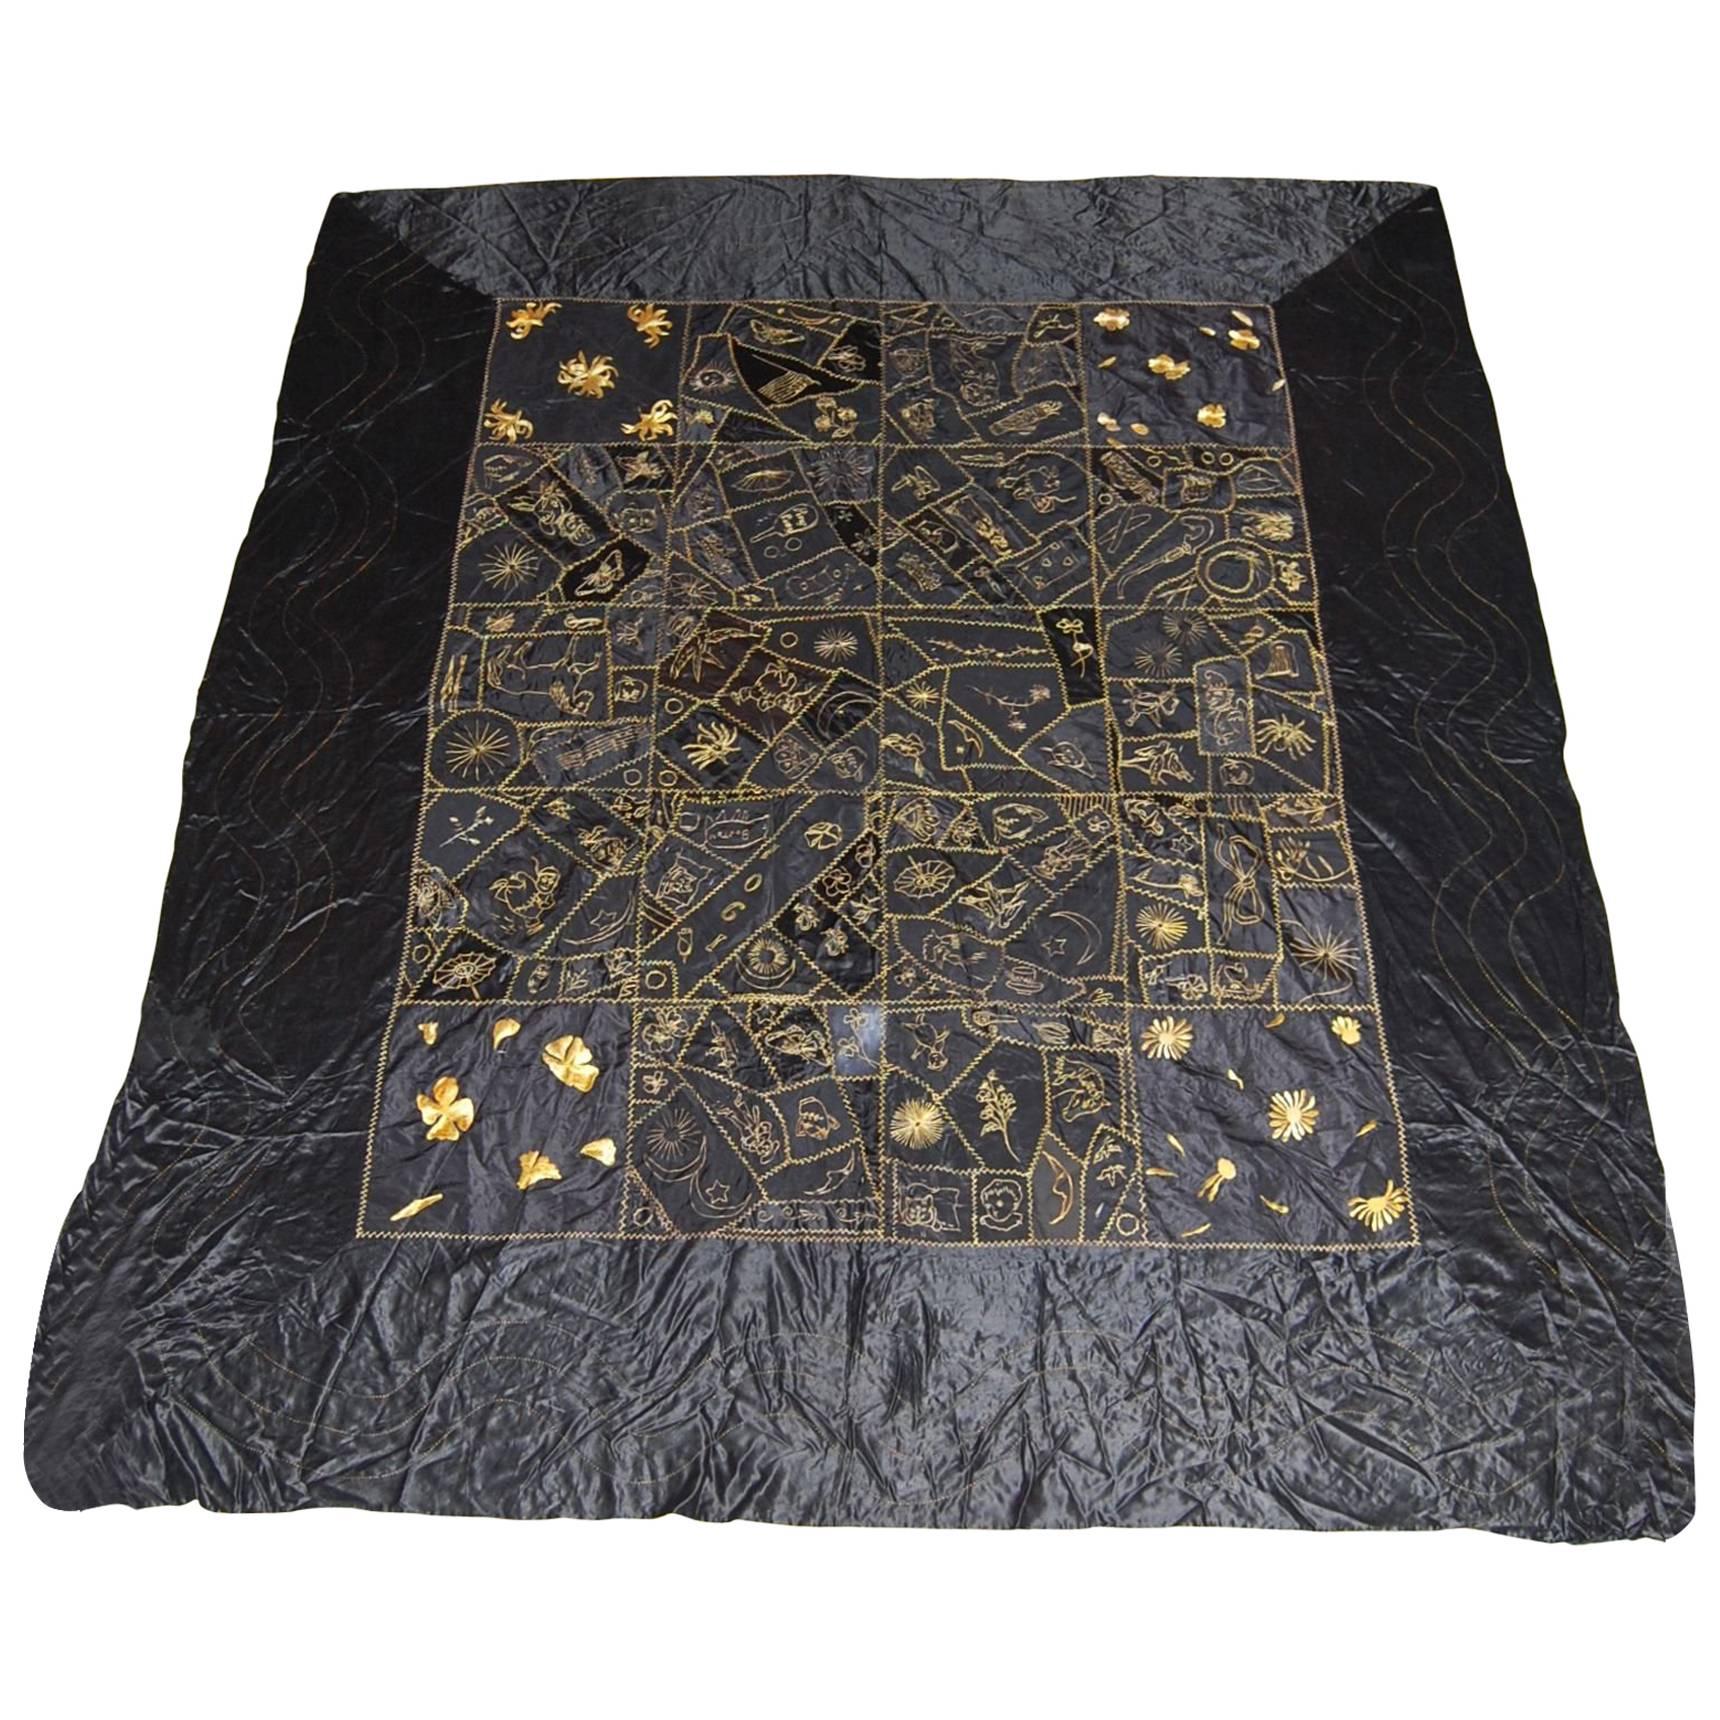 New England Silk Quilt with Gold Embroidery in Excellent Condition, 1901, Boston